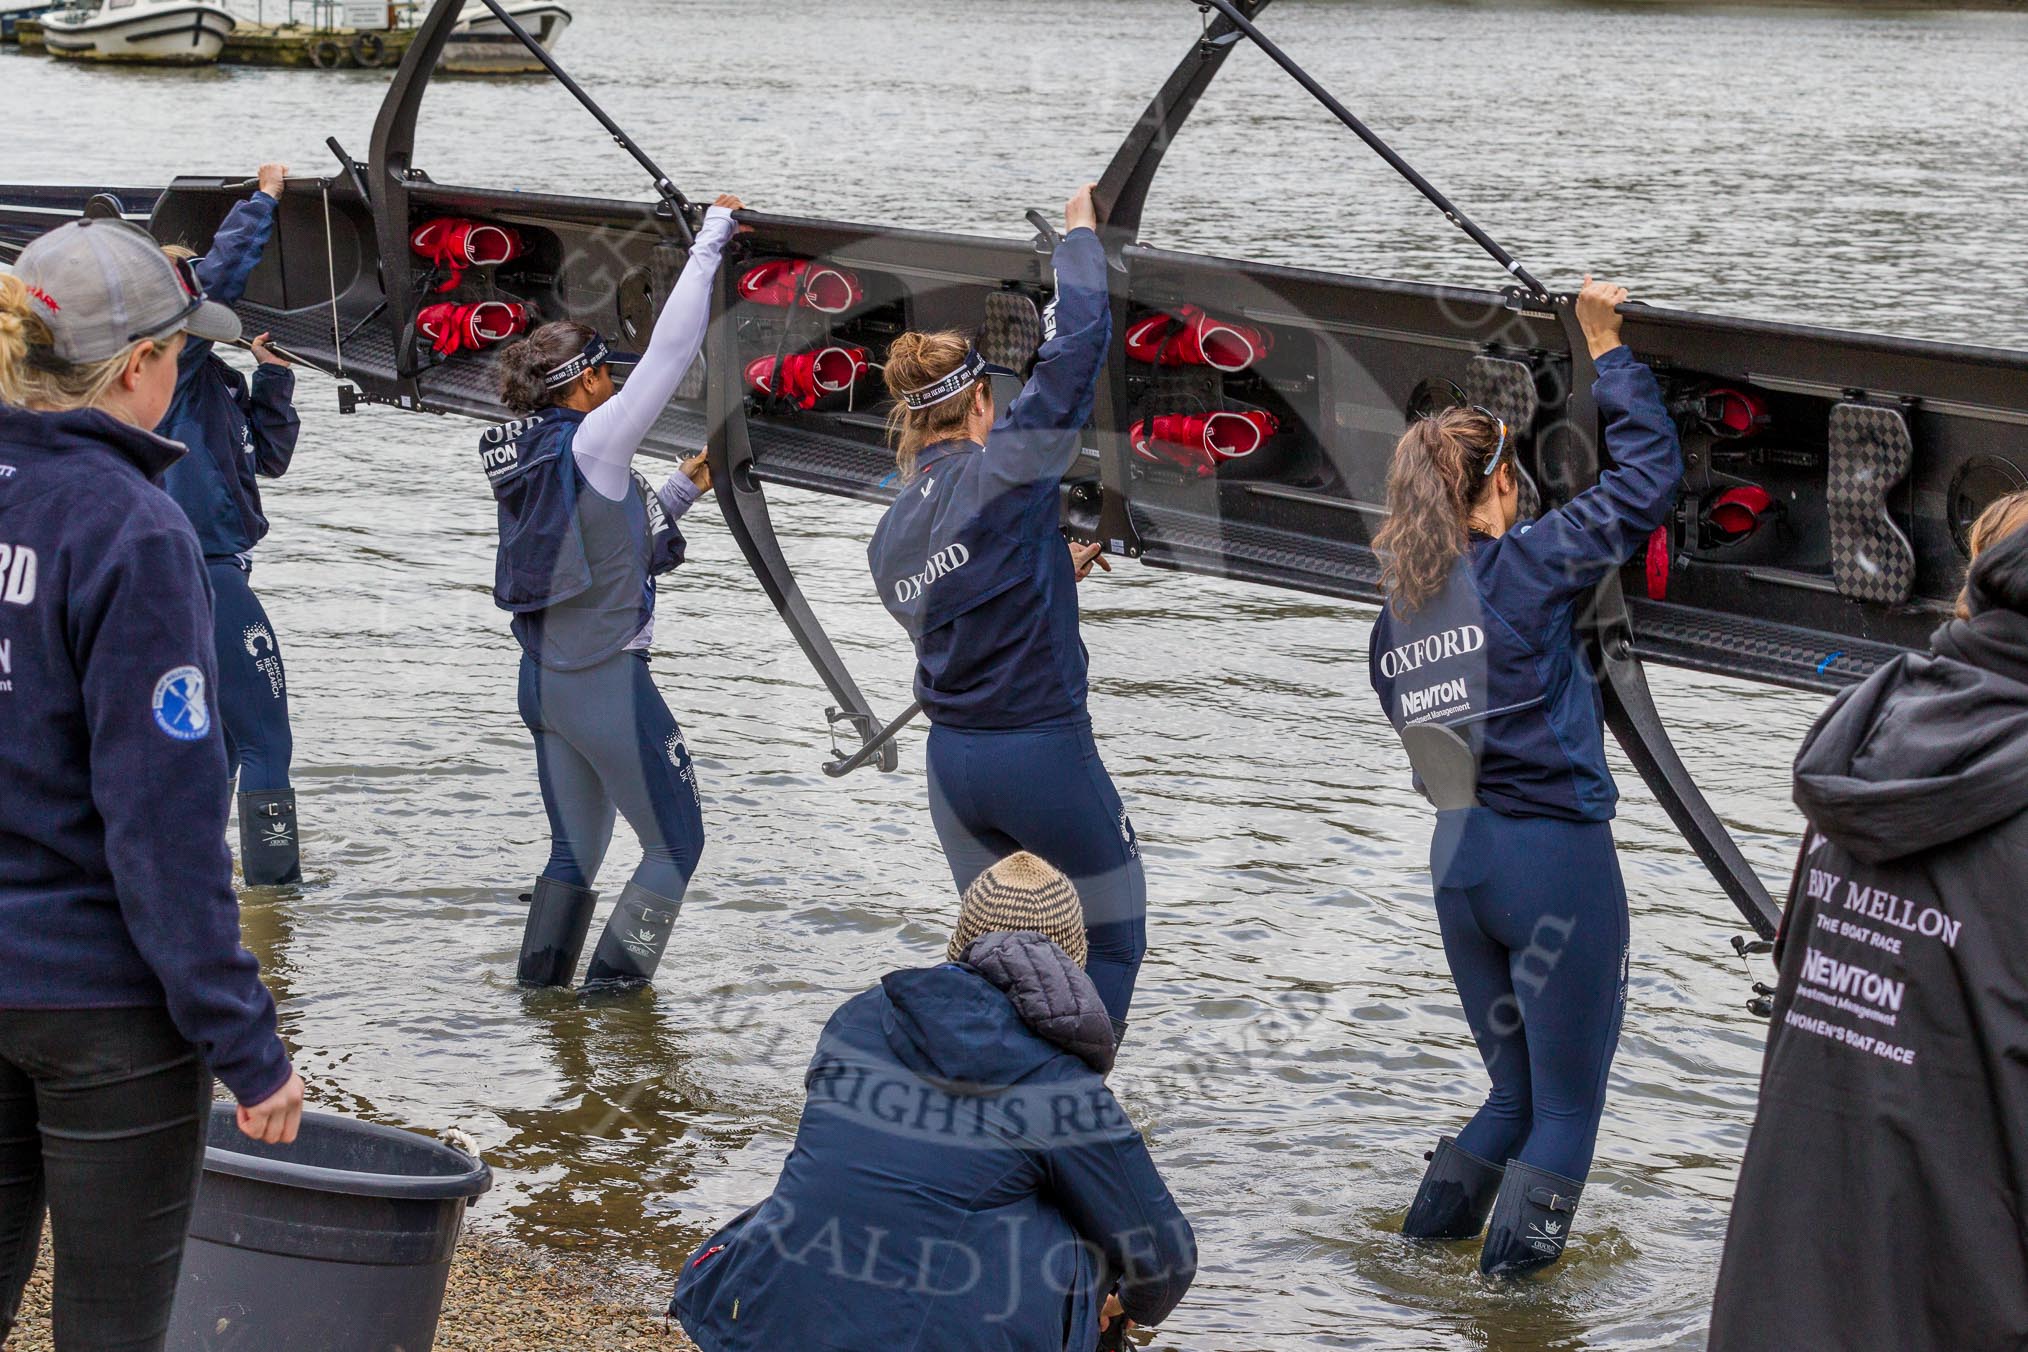 The Cancer Research UK Boat Race season 2017 - Women's Boat Race Fixture OUWBC vs Molesey BC: OUWBC turning their boat around to put it onto the river.
River Thames between Putney Bridge and Mortlake,
London SW15,

United Kingdom,
on 19 March 2017 at 15:17, image #5